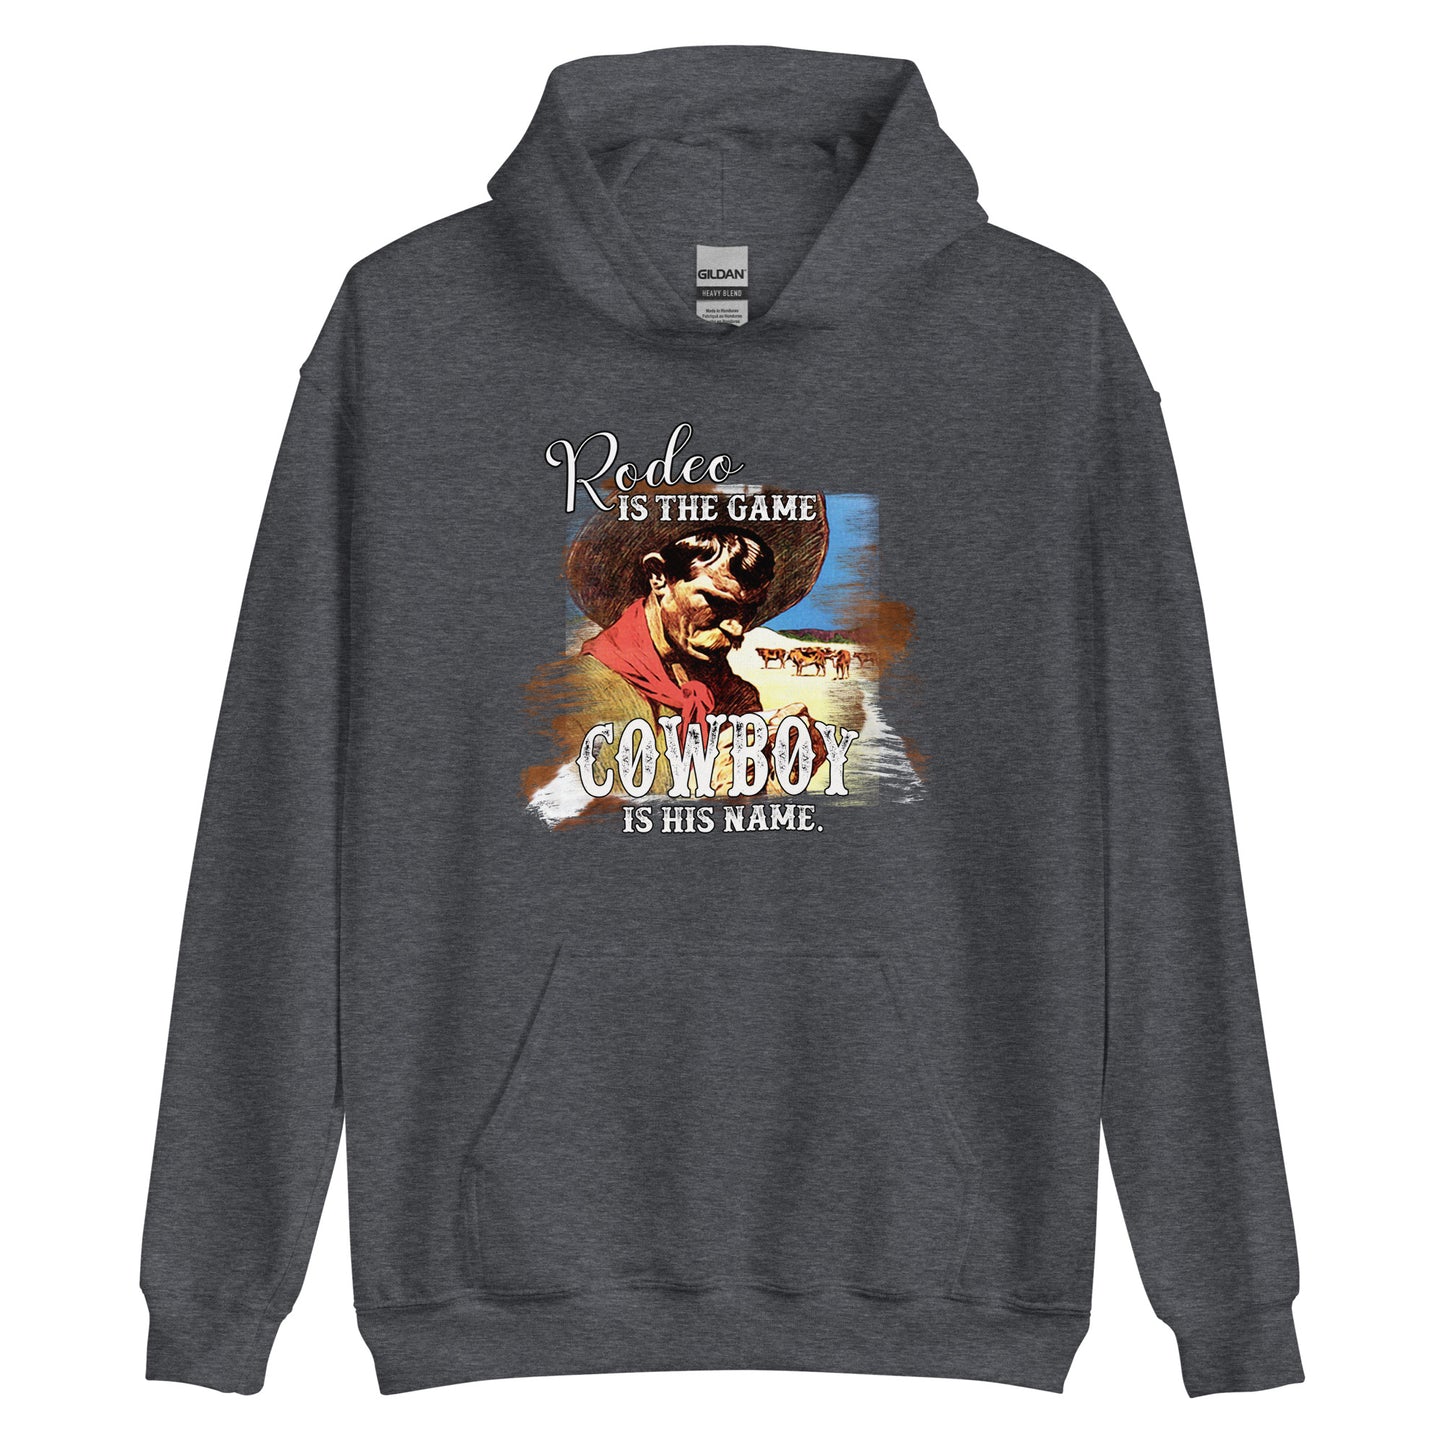 Rodeo Is The Game Unisex Hoodie choice of colors